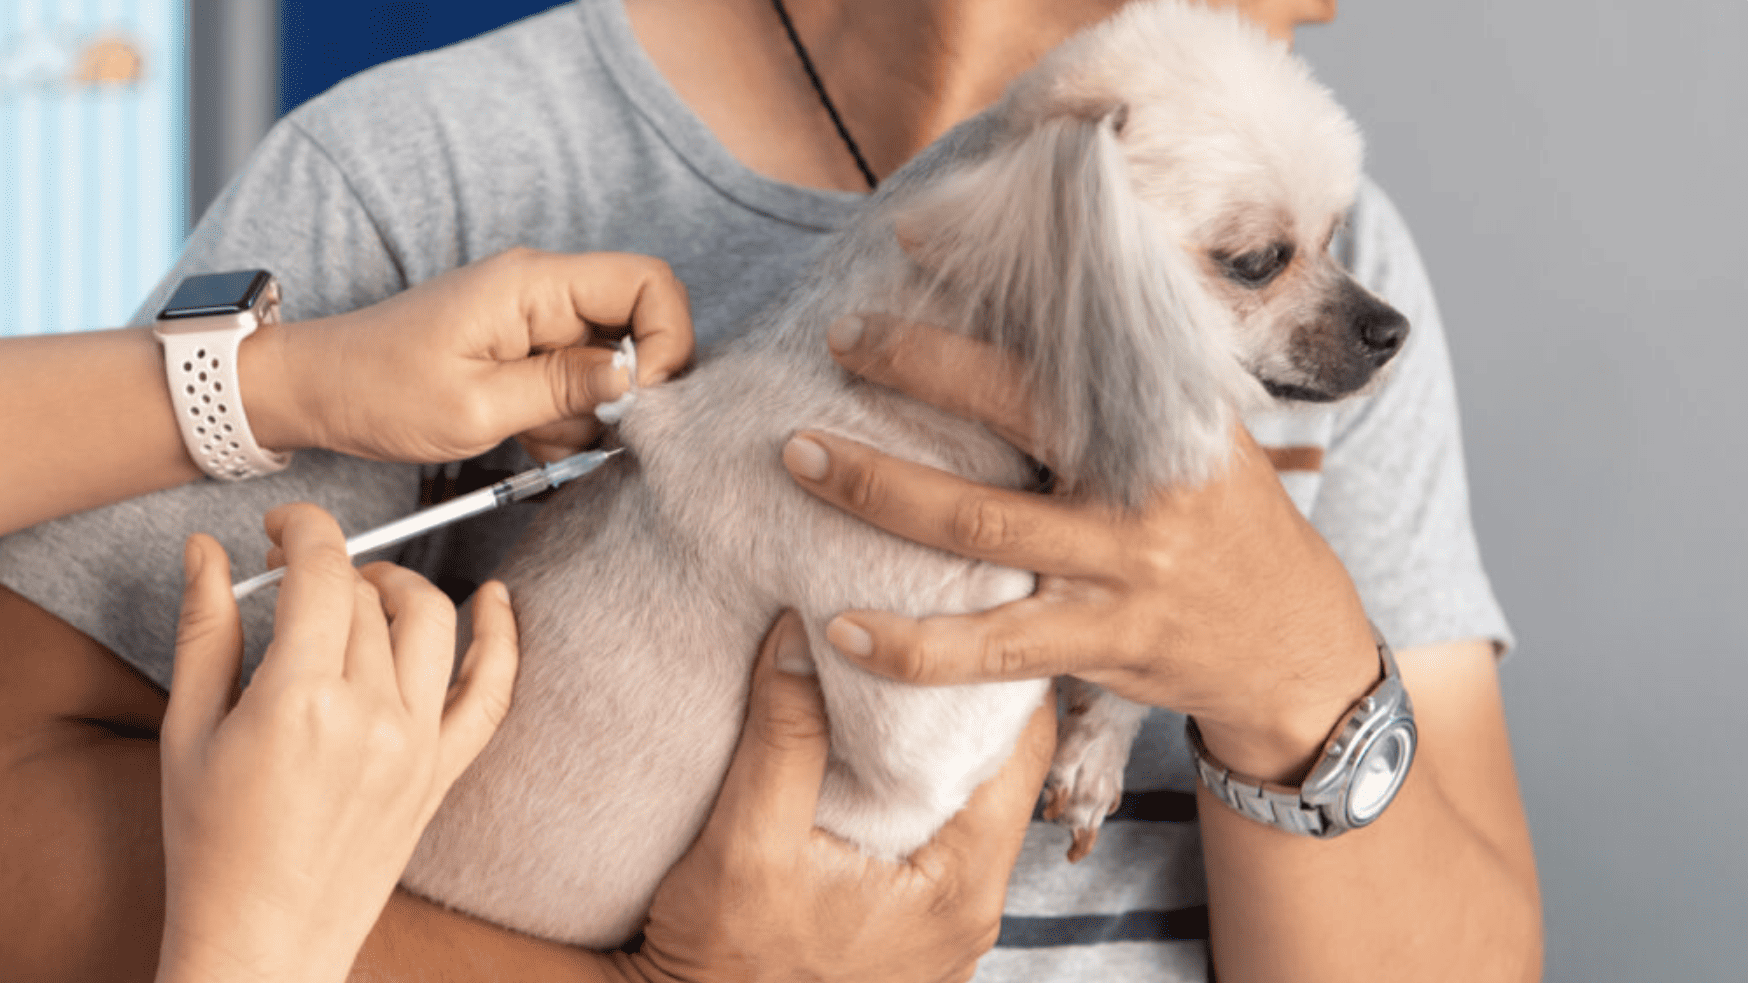 Dog receives a vaccination. One professional carefully administers the preventive vaccine, while another assures the dog's comfort and safety by securely holding it. - Dogtrekker